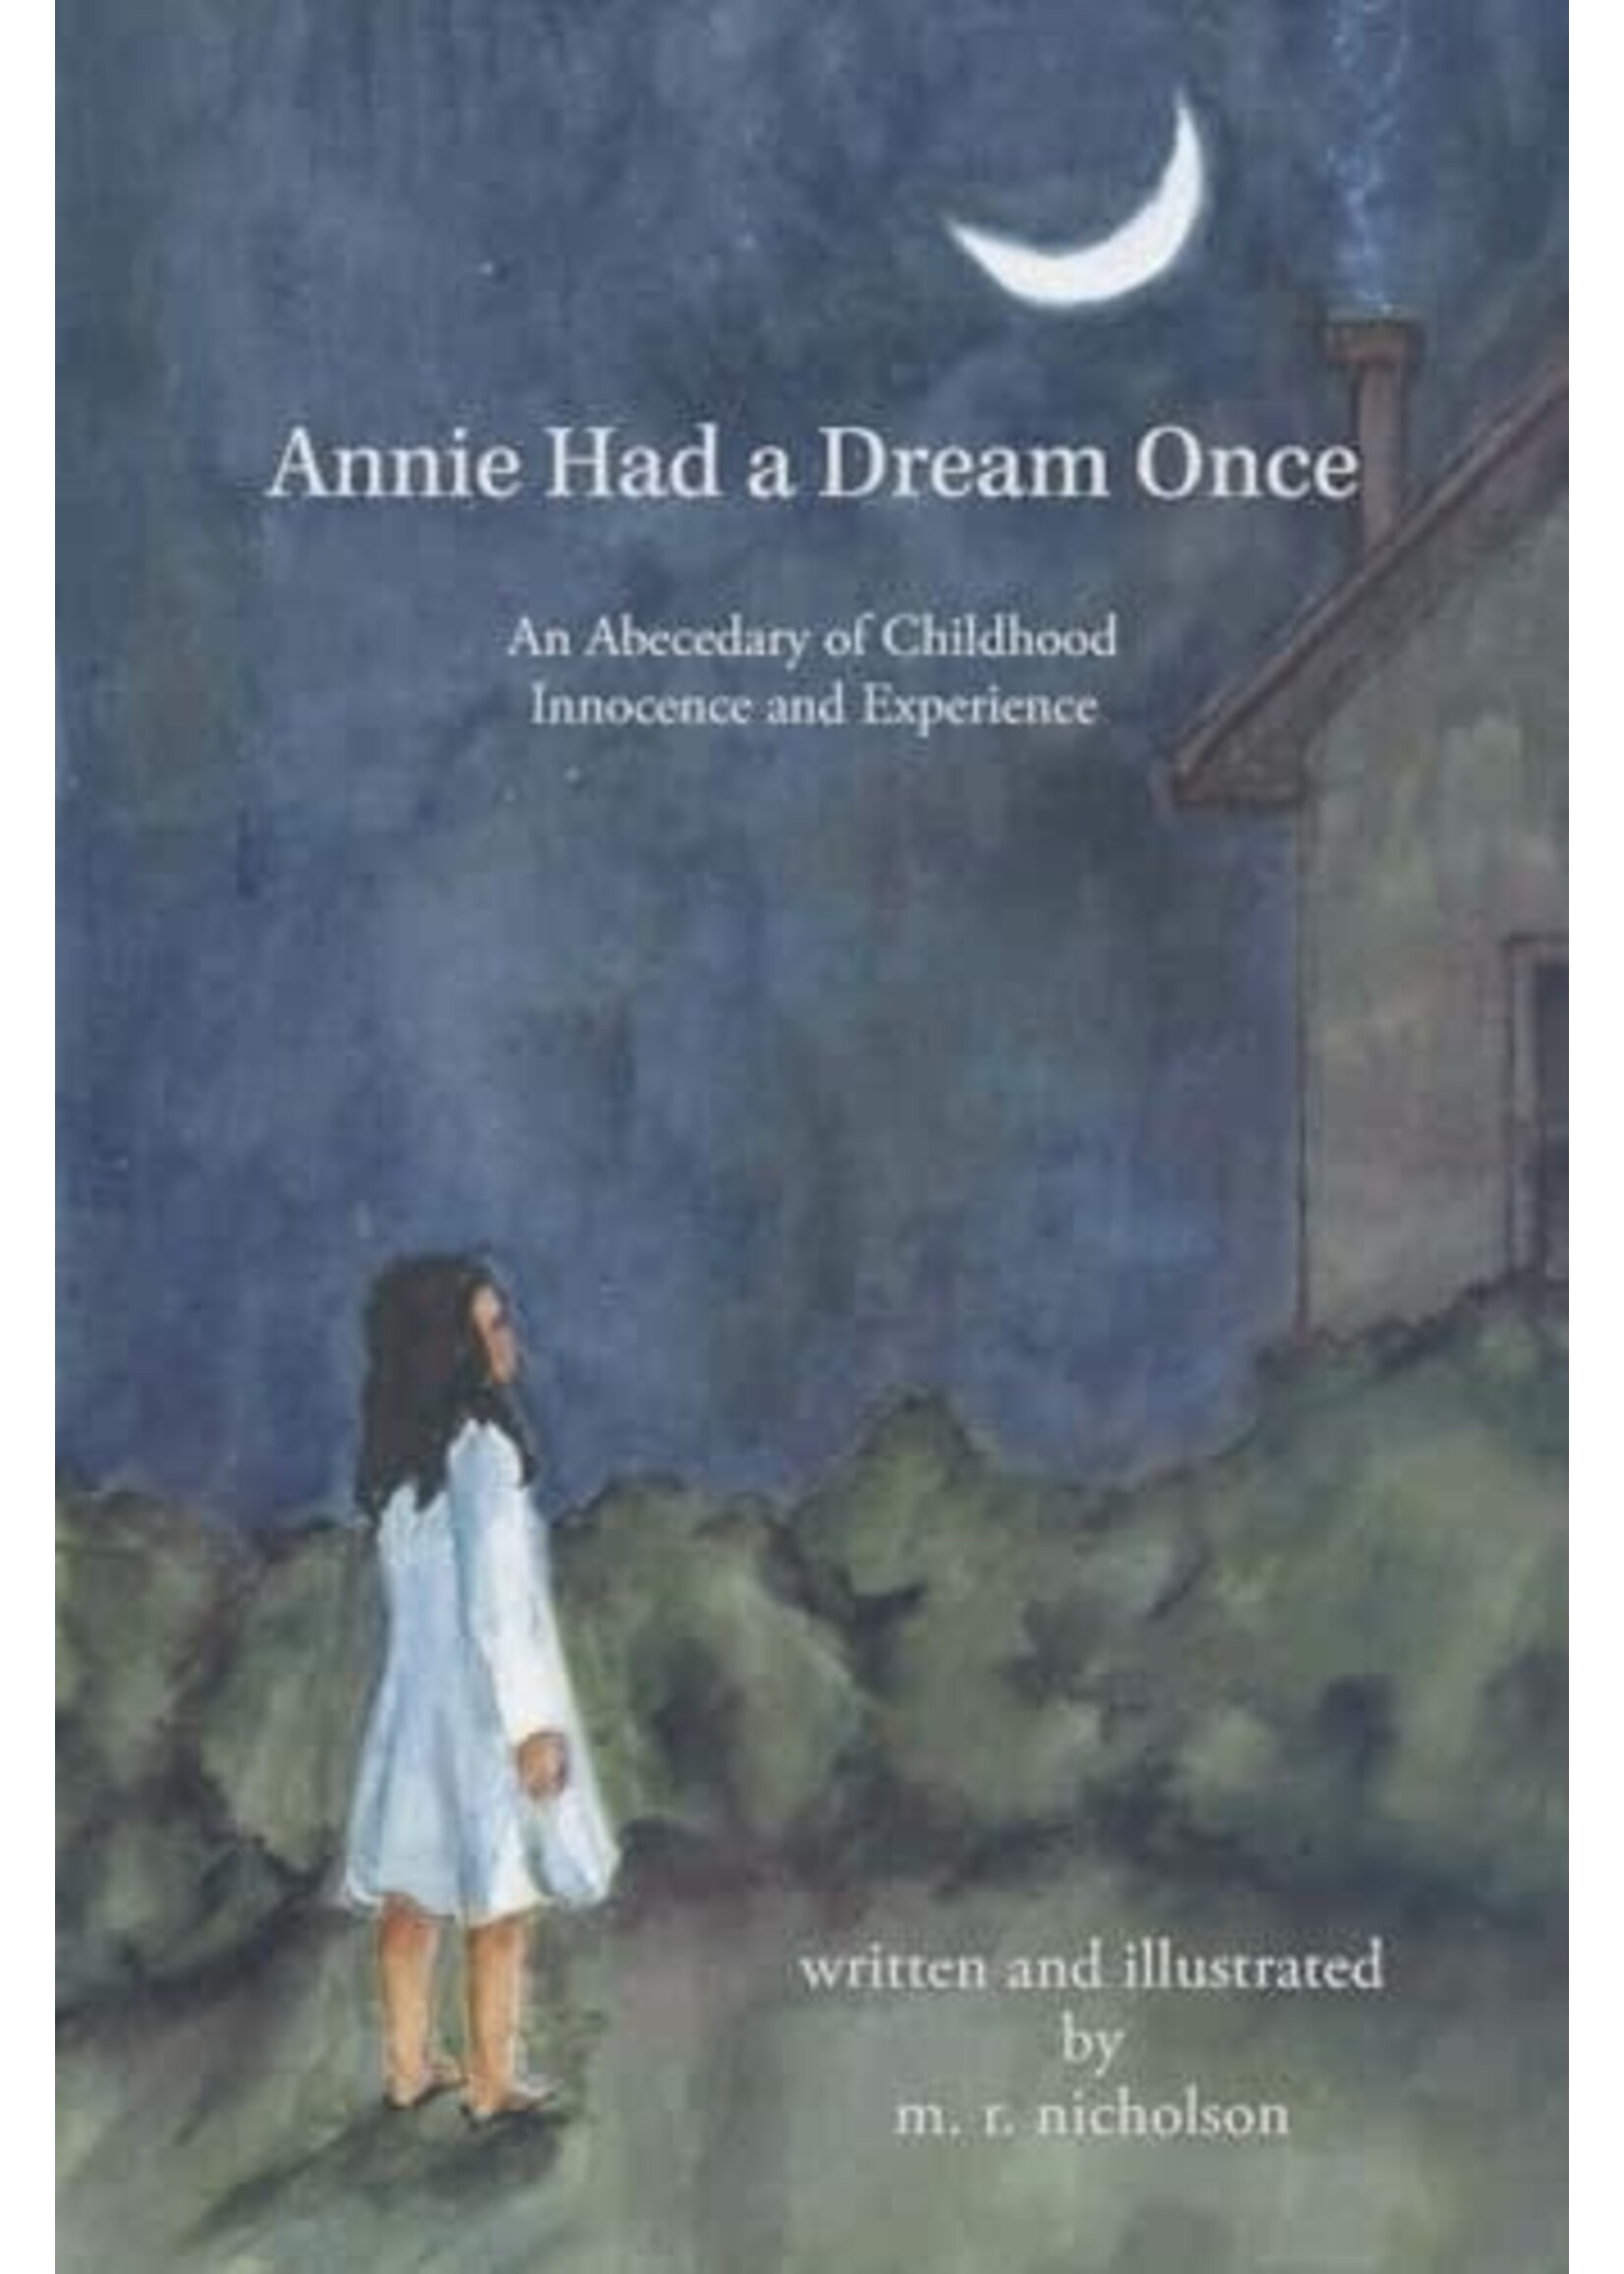 Annie Had a Dream Once: An Abecedary of Childhood Innocence and Experience by Margaret R. Nicholson (Hardcover)